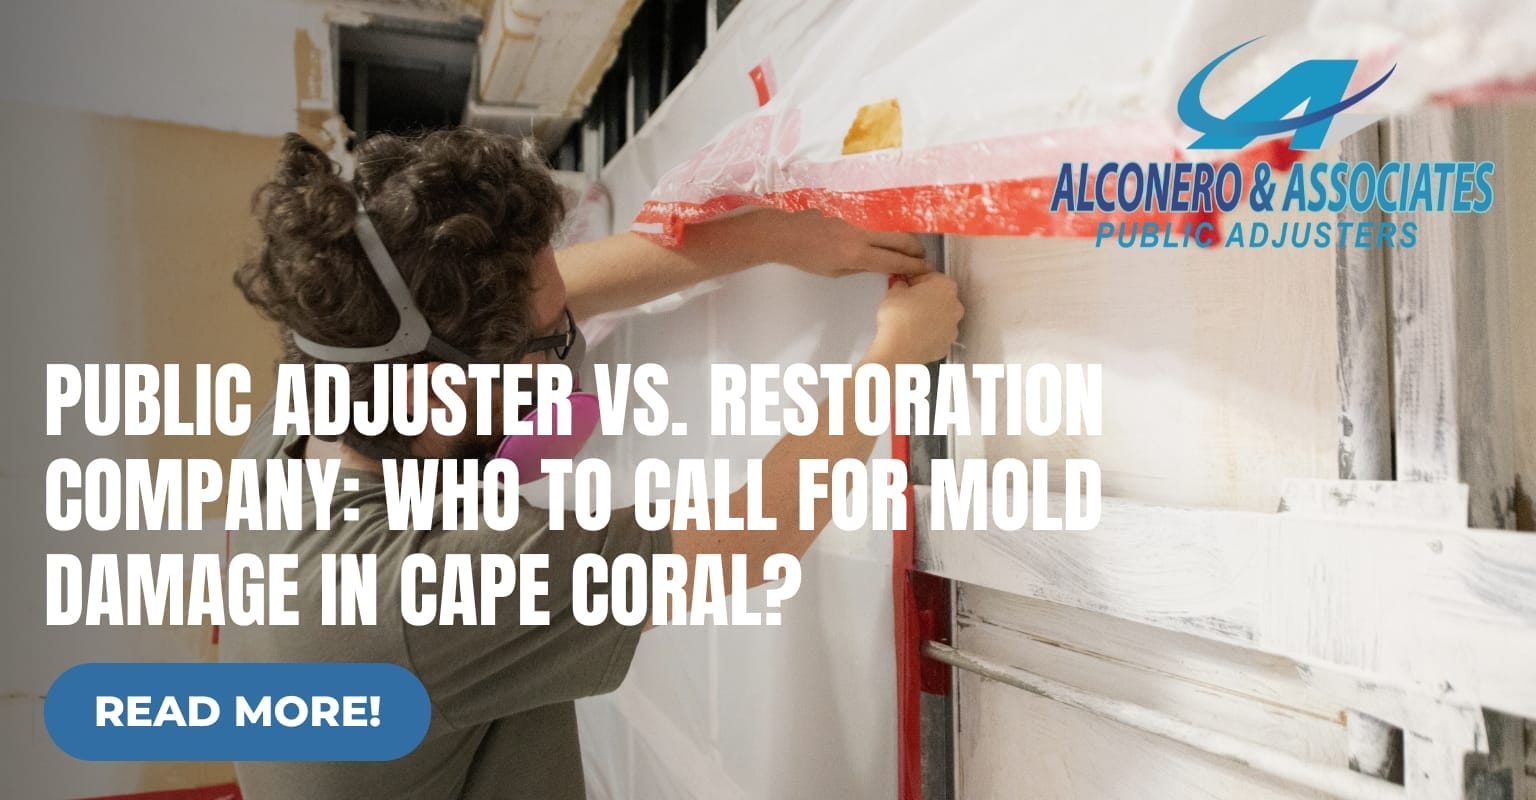 Public Adjuster vs. Restoration Company: Who to Call for Mold Damage in Cape Coral?